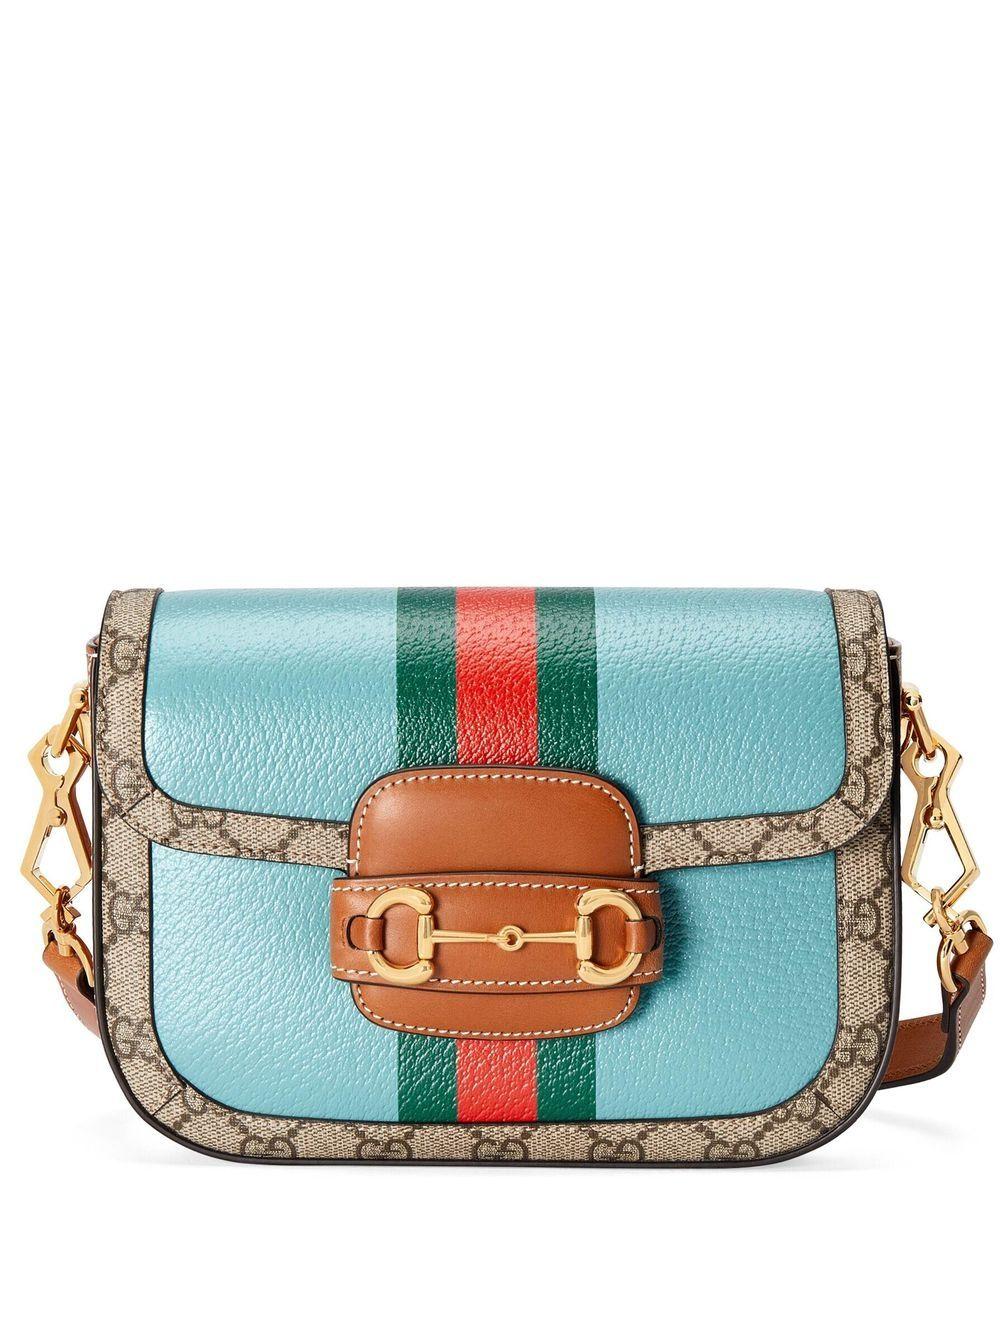 Gucci Horsebit 1955 mini rounded bag in white leather